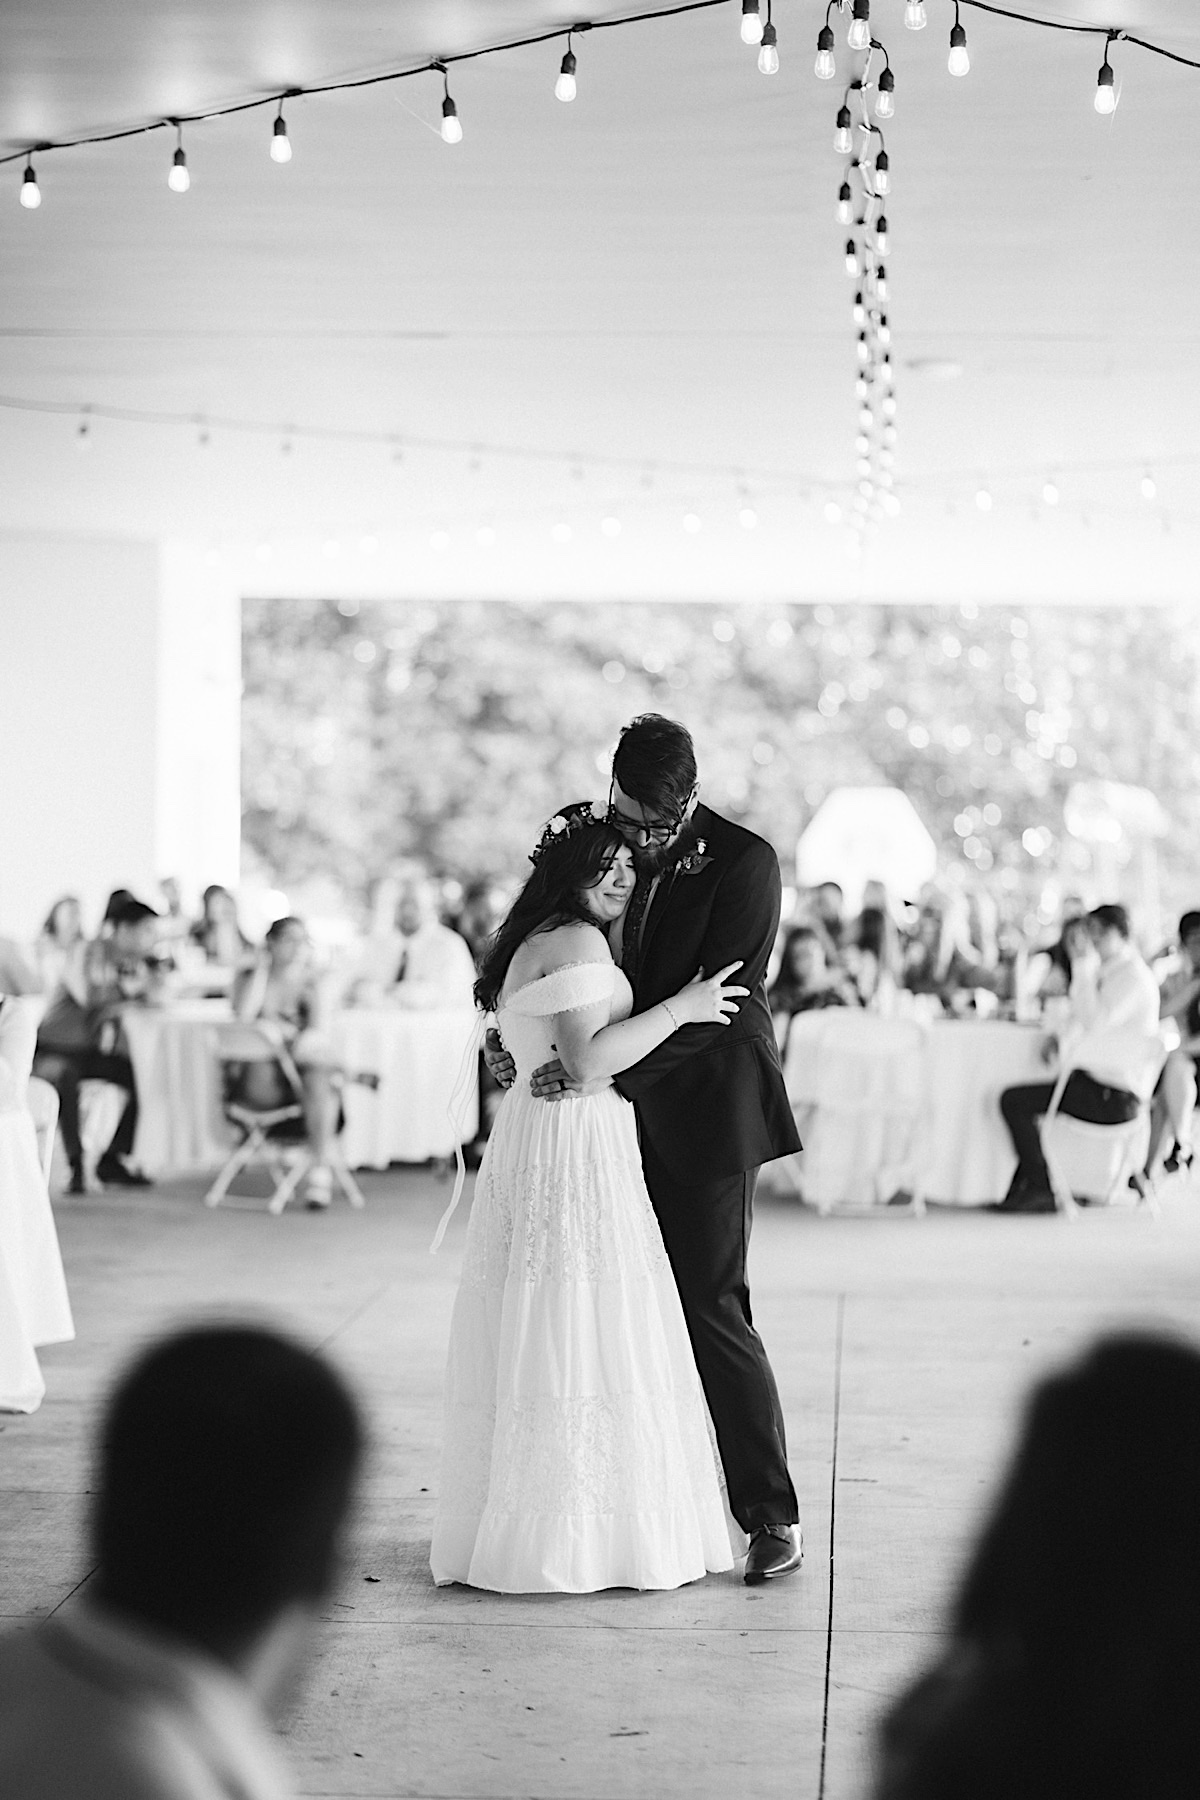 Husband and wife first dance during wedding reception. She cuddles into his chest under white string patio lights